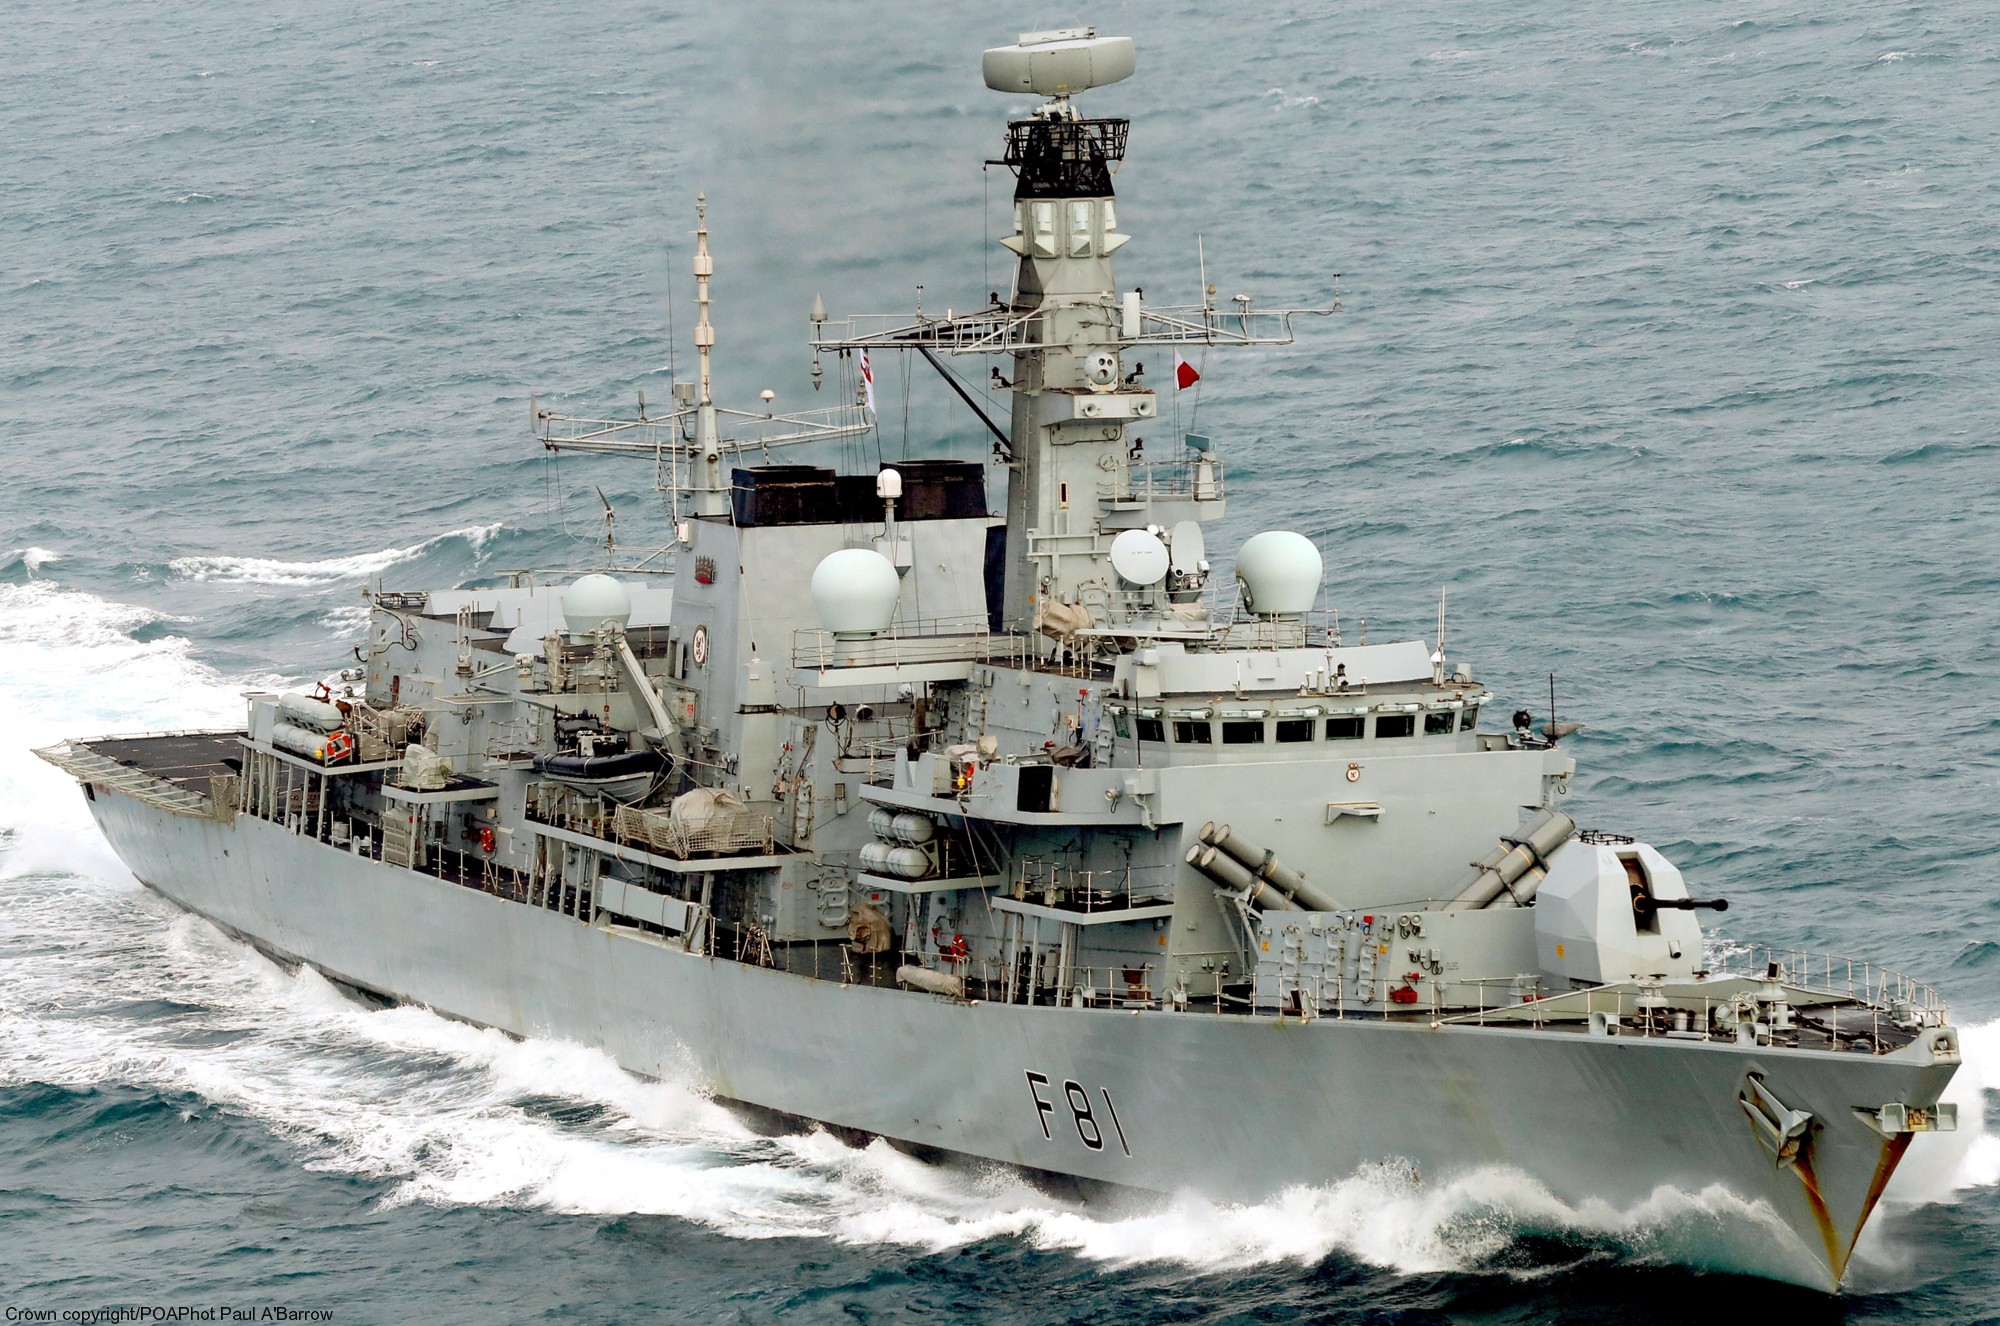 f-81 hms sutherland type 23 duke class guided missile frigate ffg royal navy 45